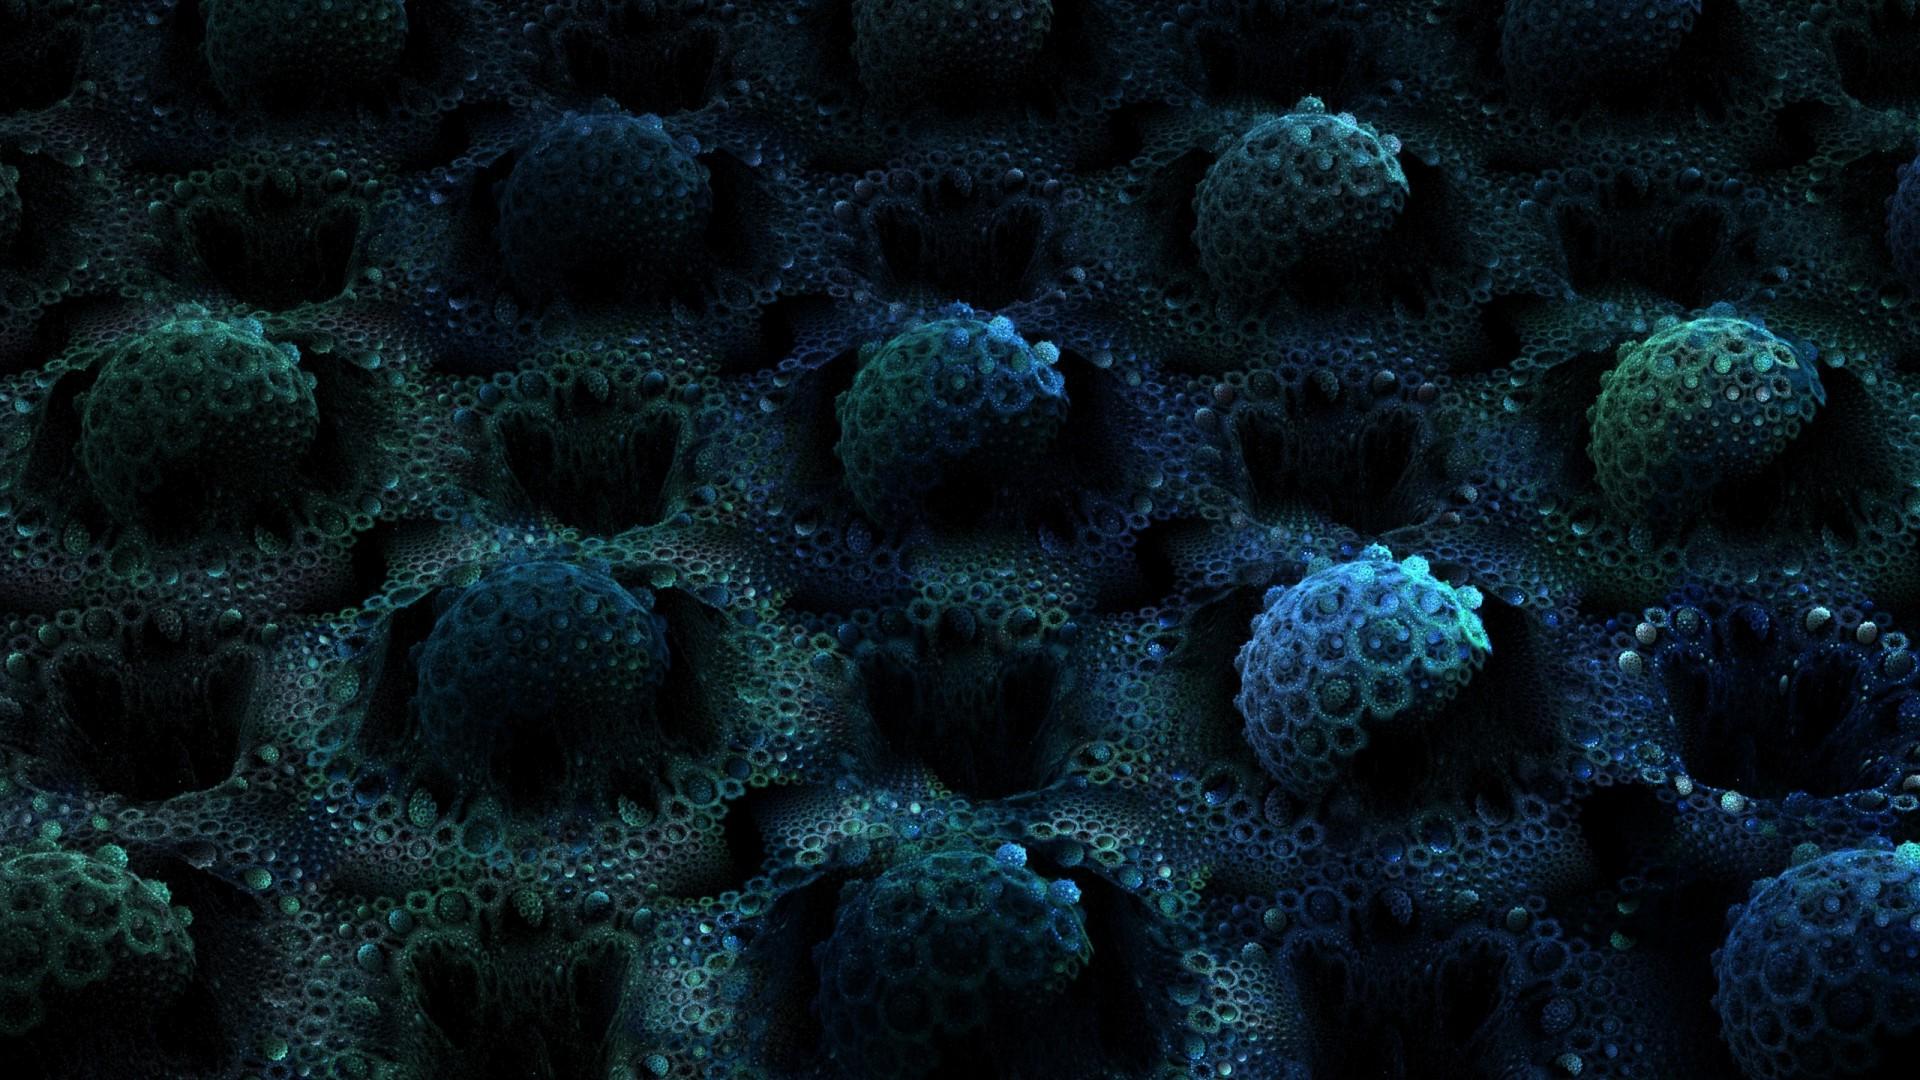 Wallpaper, abstract, sphere, blue, coral reef, 1920x1080 px